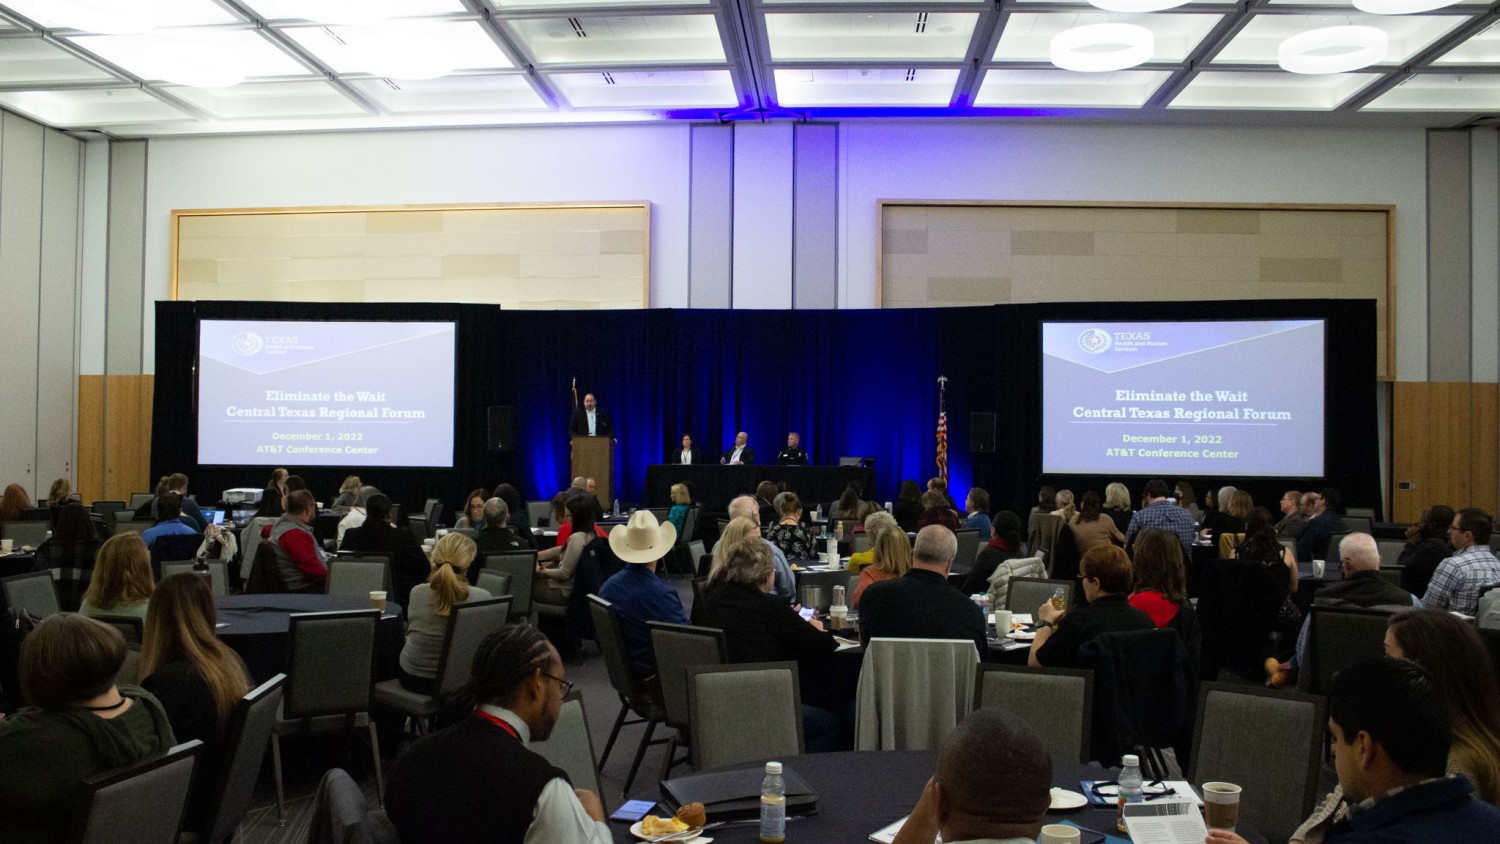 The header image depicts a Texas Health and Human Services conference taking place in a large room. Participants are seated throughout the room, engaged in the event. Two projector screens are positioned on each side of the room, prominently displaying a slide that reads, "Eliminate the Wait Central Texas Regional Forum,” and the date and location of the event. In the center of the room, an individual stands at a podium, delivering a speech to the audience, and three others are seated on stage assuming a speaker role throughout the conference. This photo captures the dynamic of valuable insights and discussions related to eliminating wait times for beds in State hospitals.